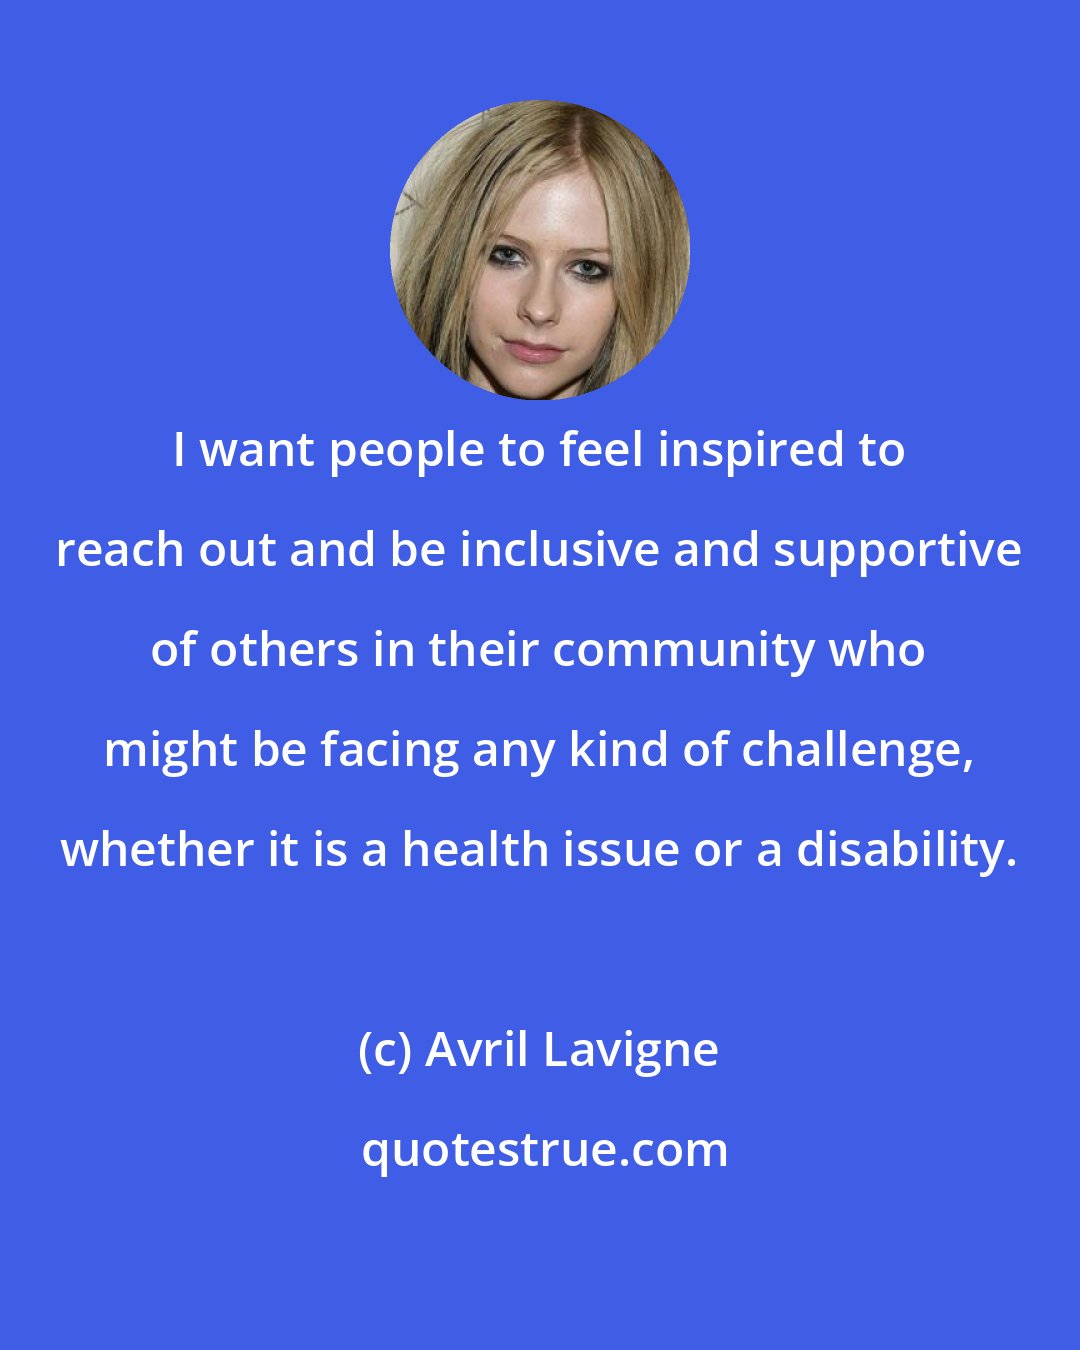 Avril Lavigne: I want people to feel inspired to reach out and be inclusive and supportive of others in their community who might be facing any kind of challenge, whether it is a health issue or a disability.